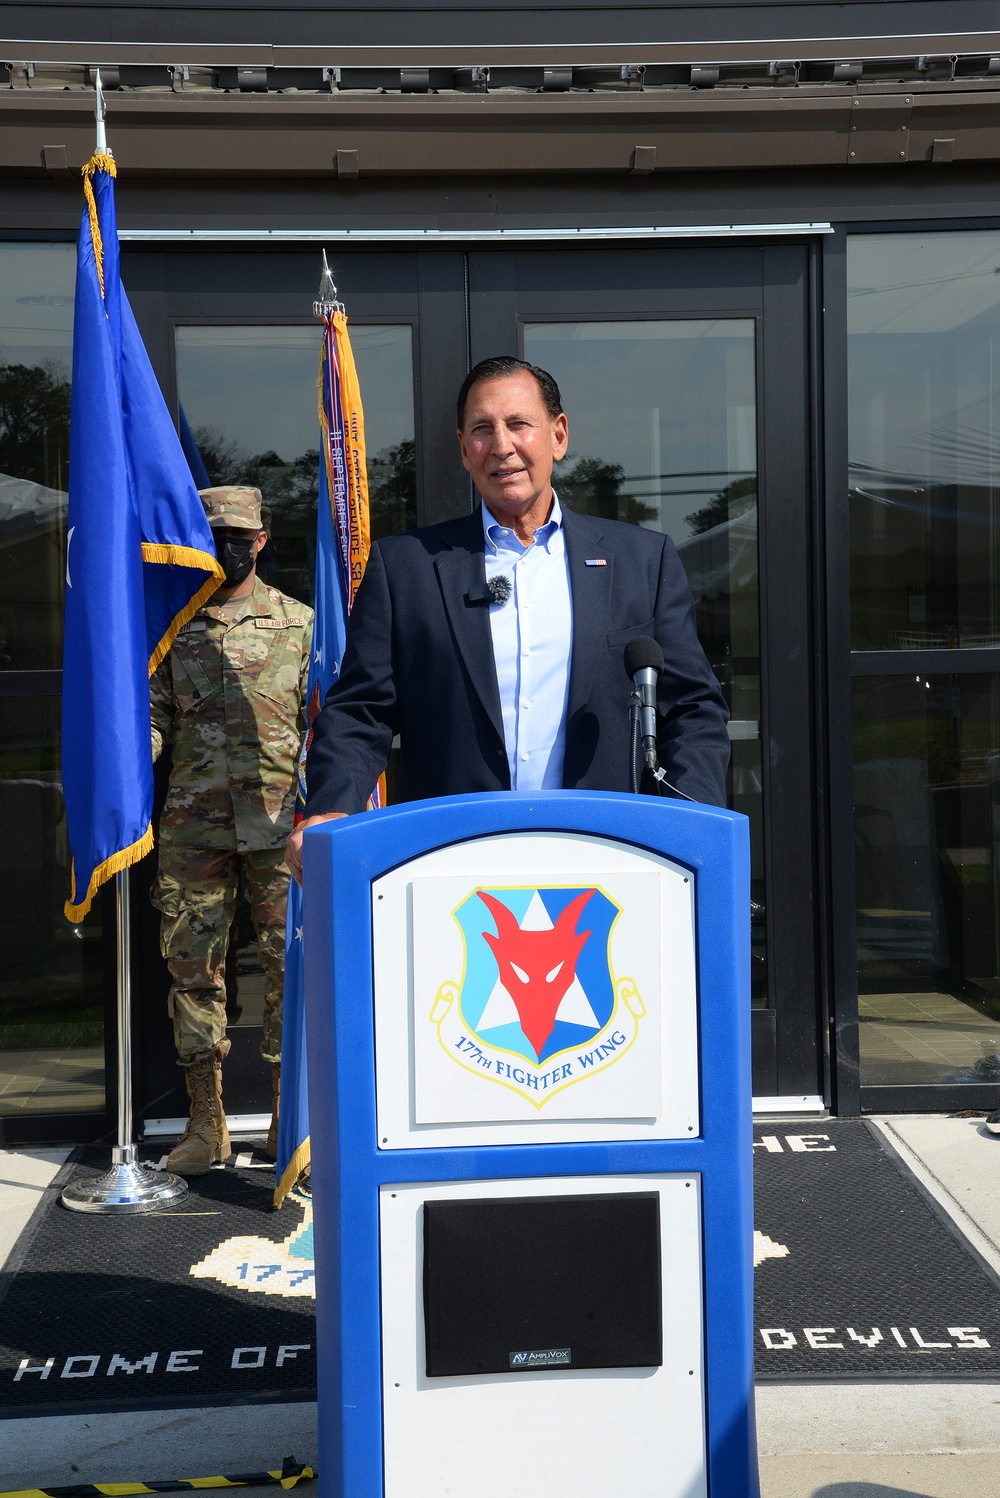 177th Fighter Wing of the New Jersey Air National Guard names its Headquarters Building in honor of Frank A. LoBiondo